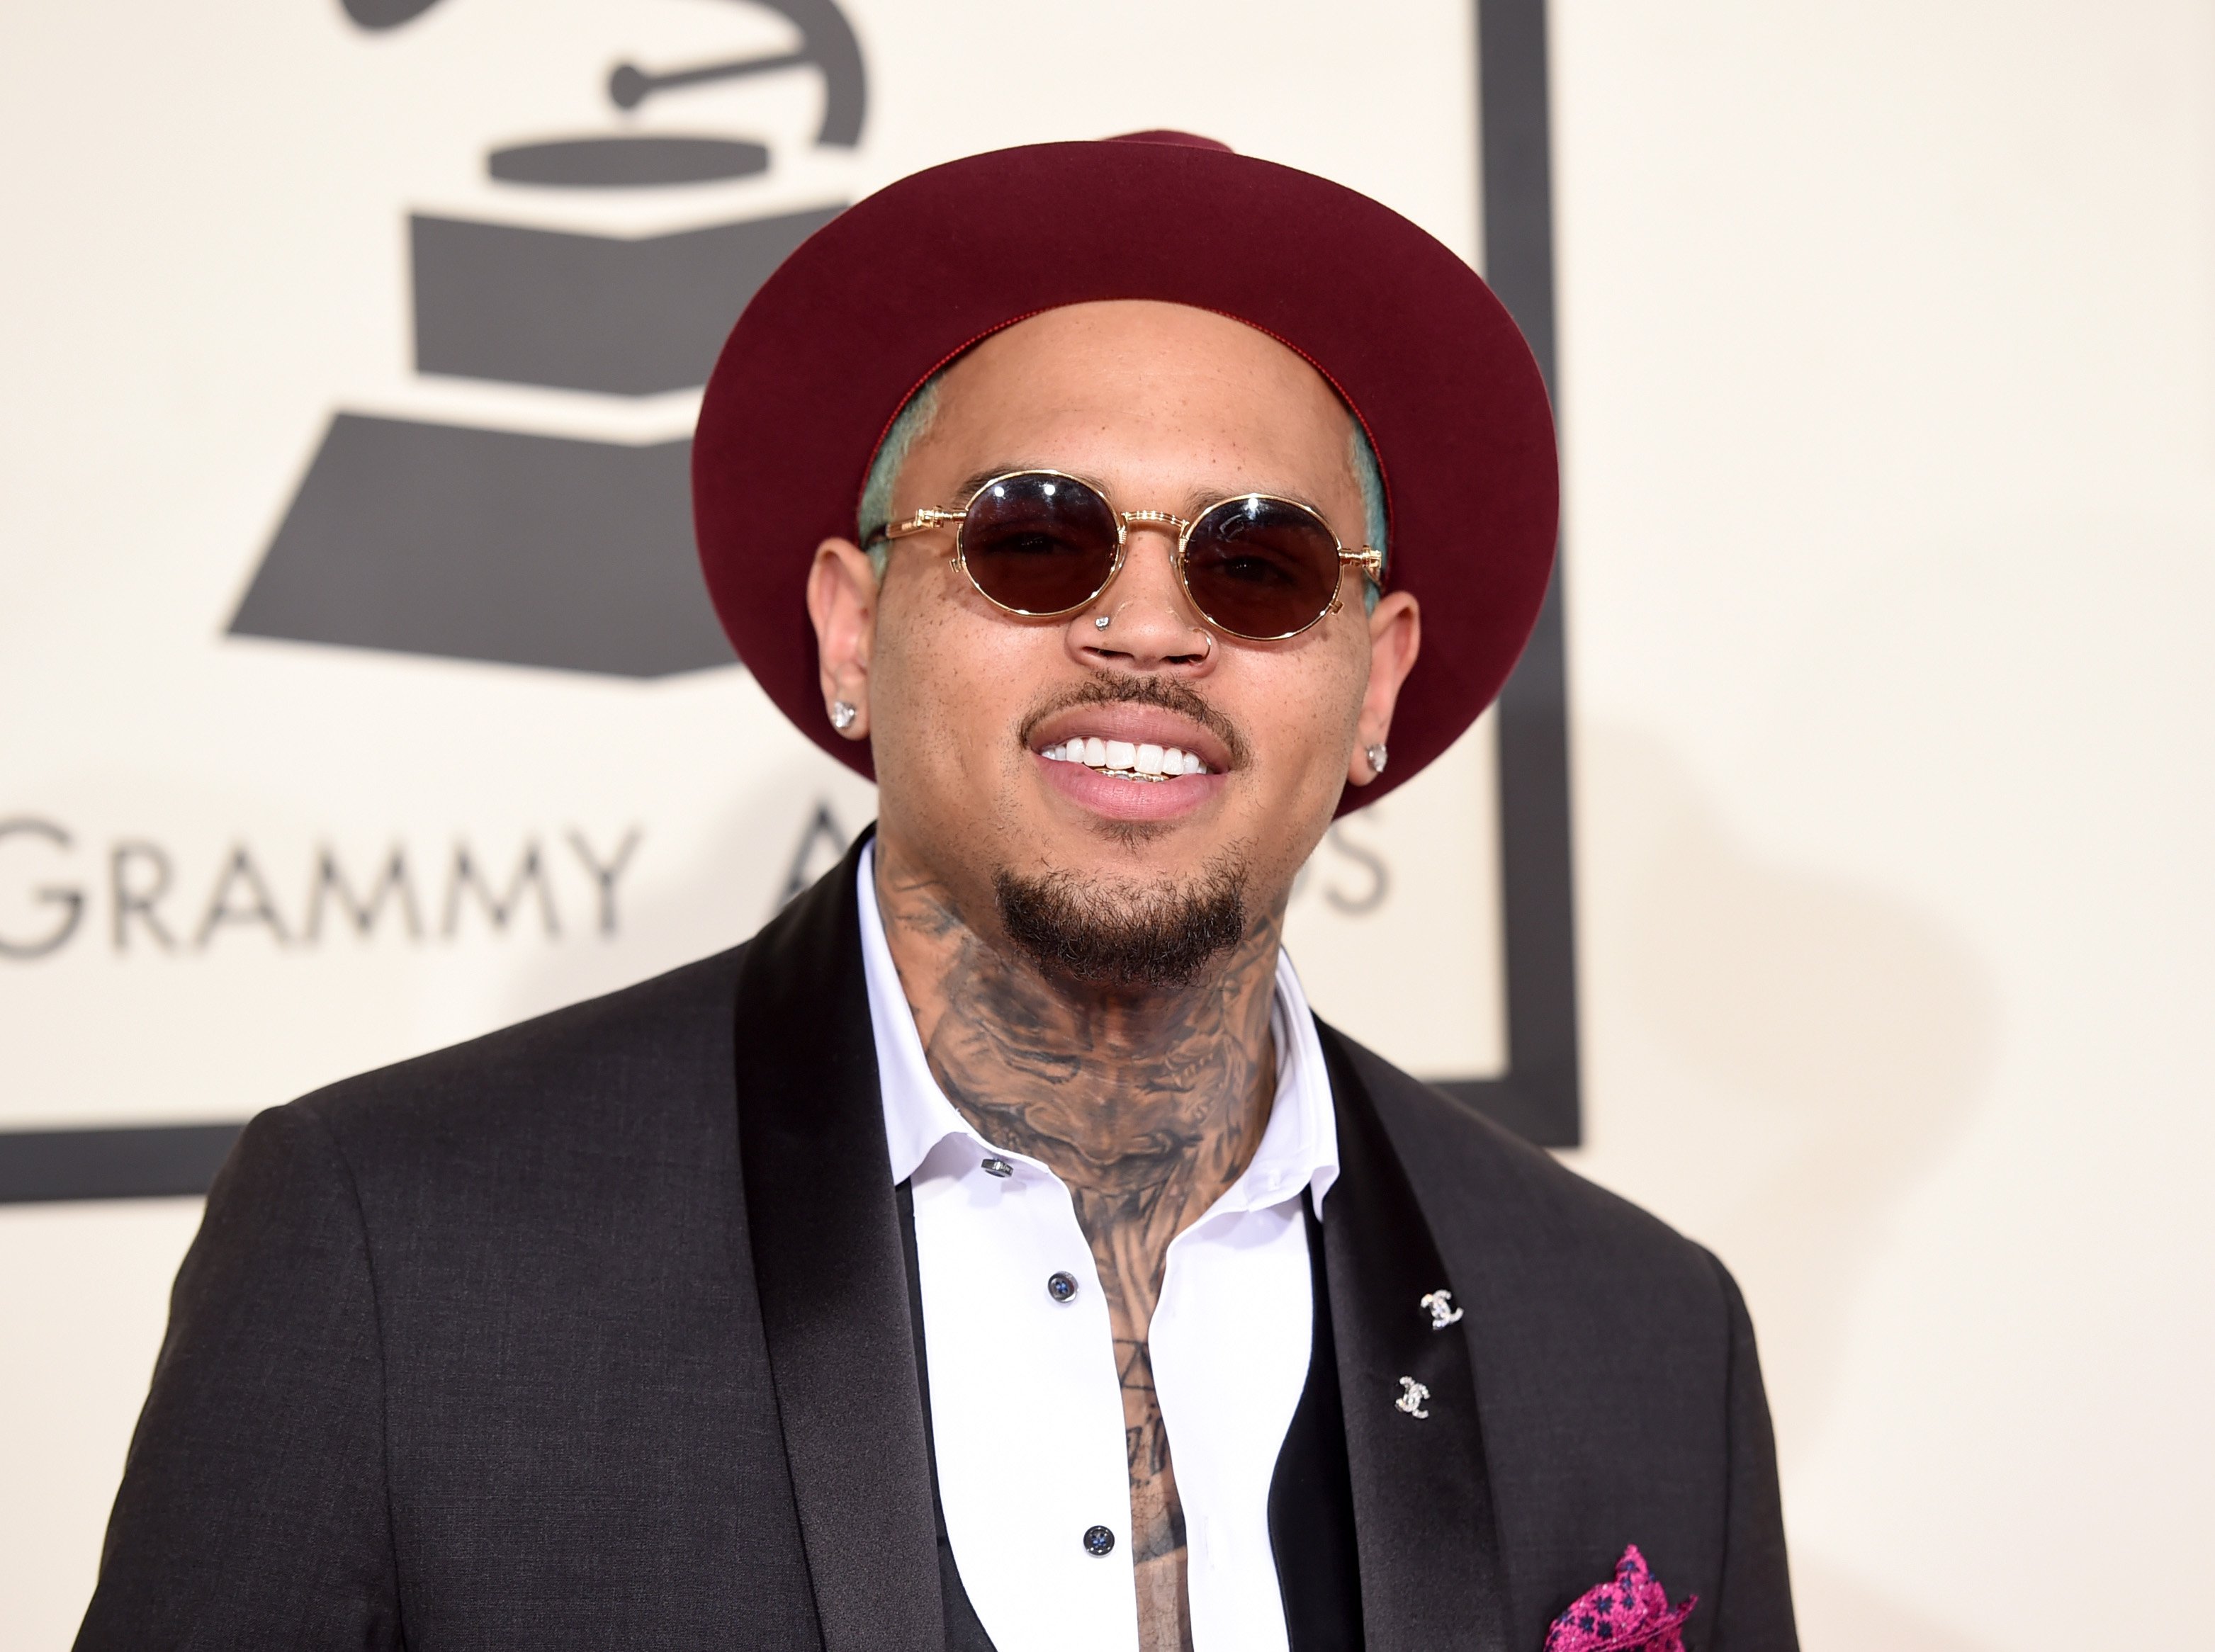 Chris Brown at The 57th Annual Grammy Awards at the Staples Center on February 8, 2015 in Los Angeles, California. | Source: Getty Images